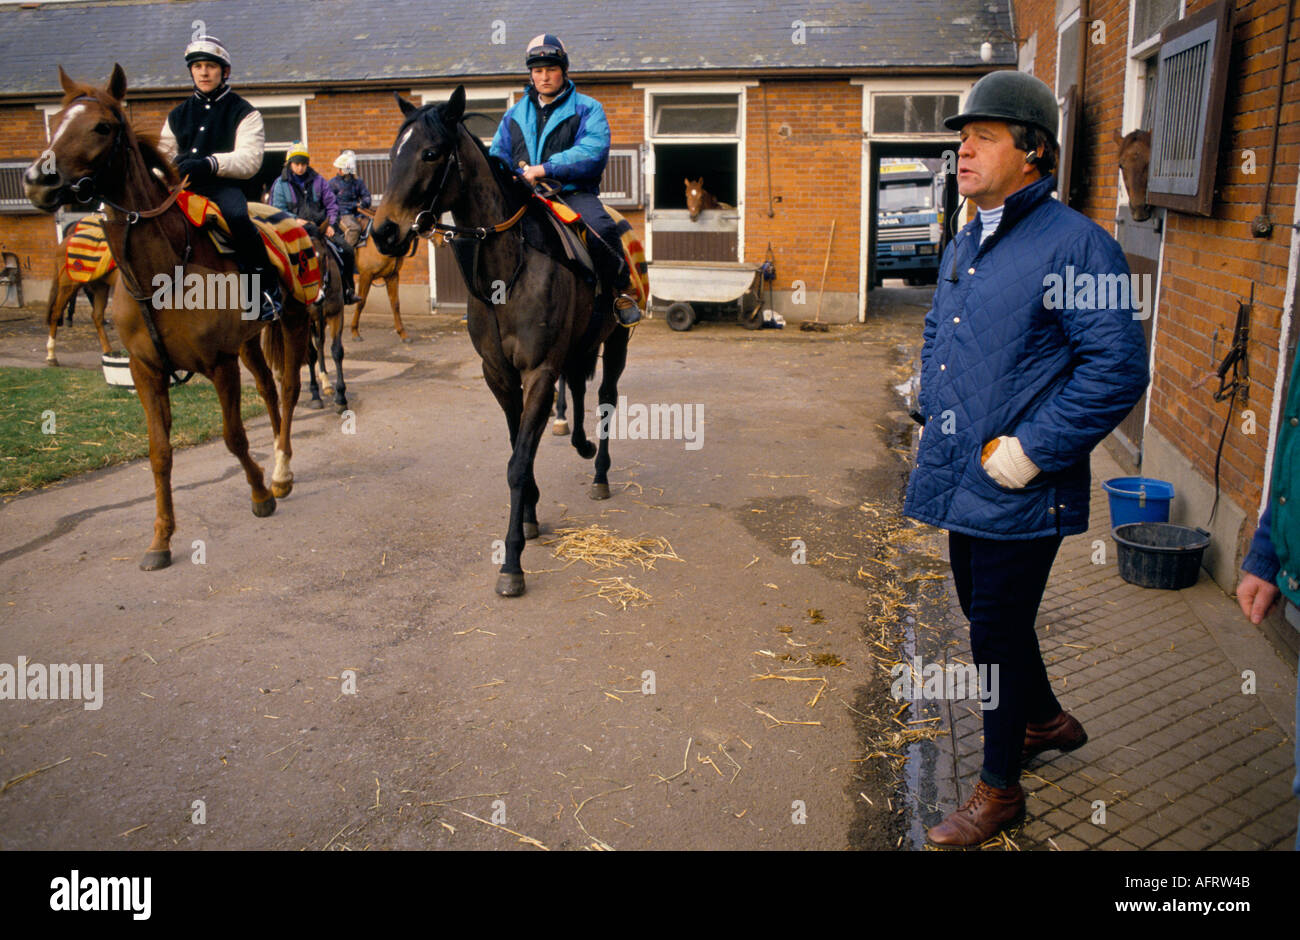 Sir Michael Stoute thoroughbred race horse trainer Newmarket, Suffolk in his Yard inspecting horse early morning 1990s 1993 UK HOMER SYKES. Stock Photo